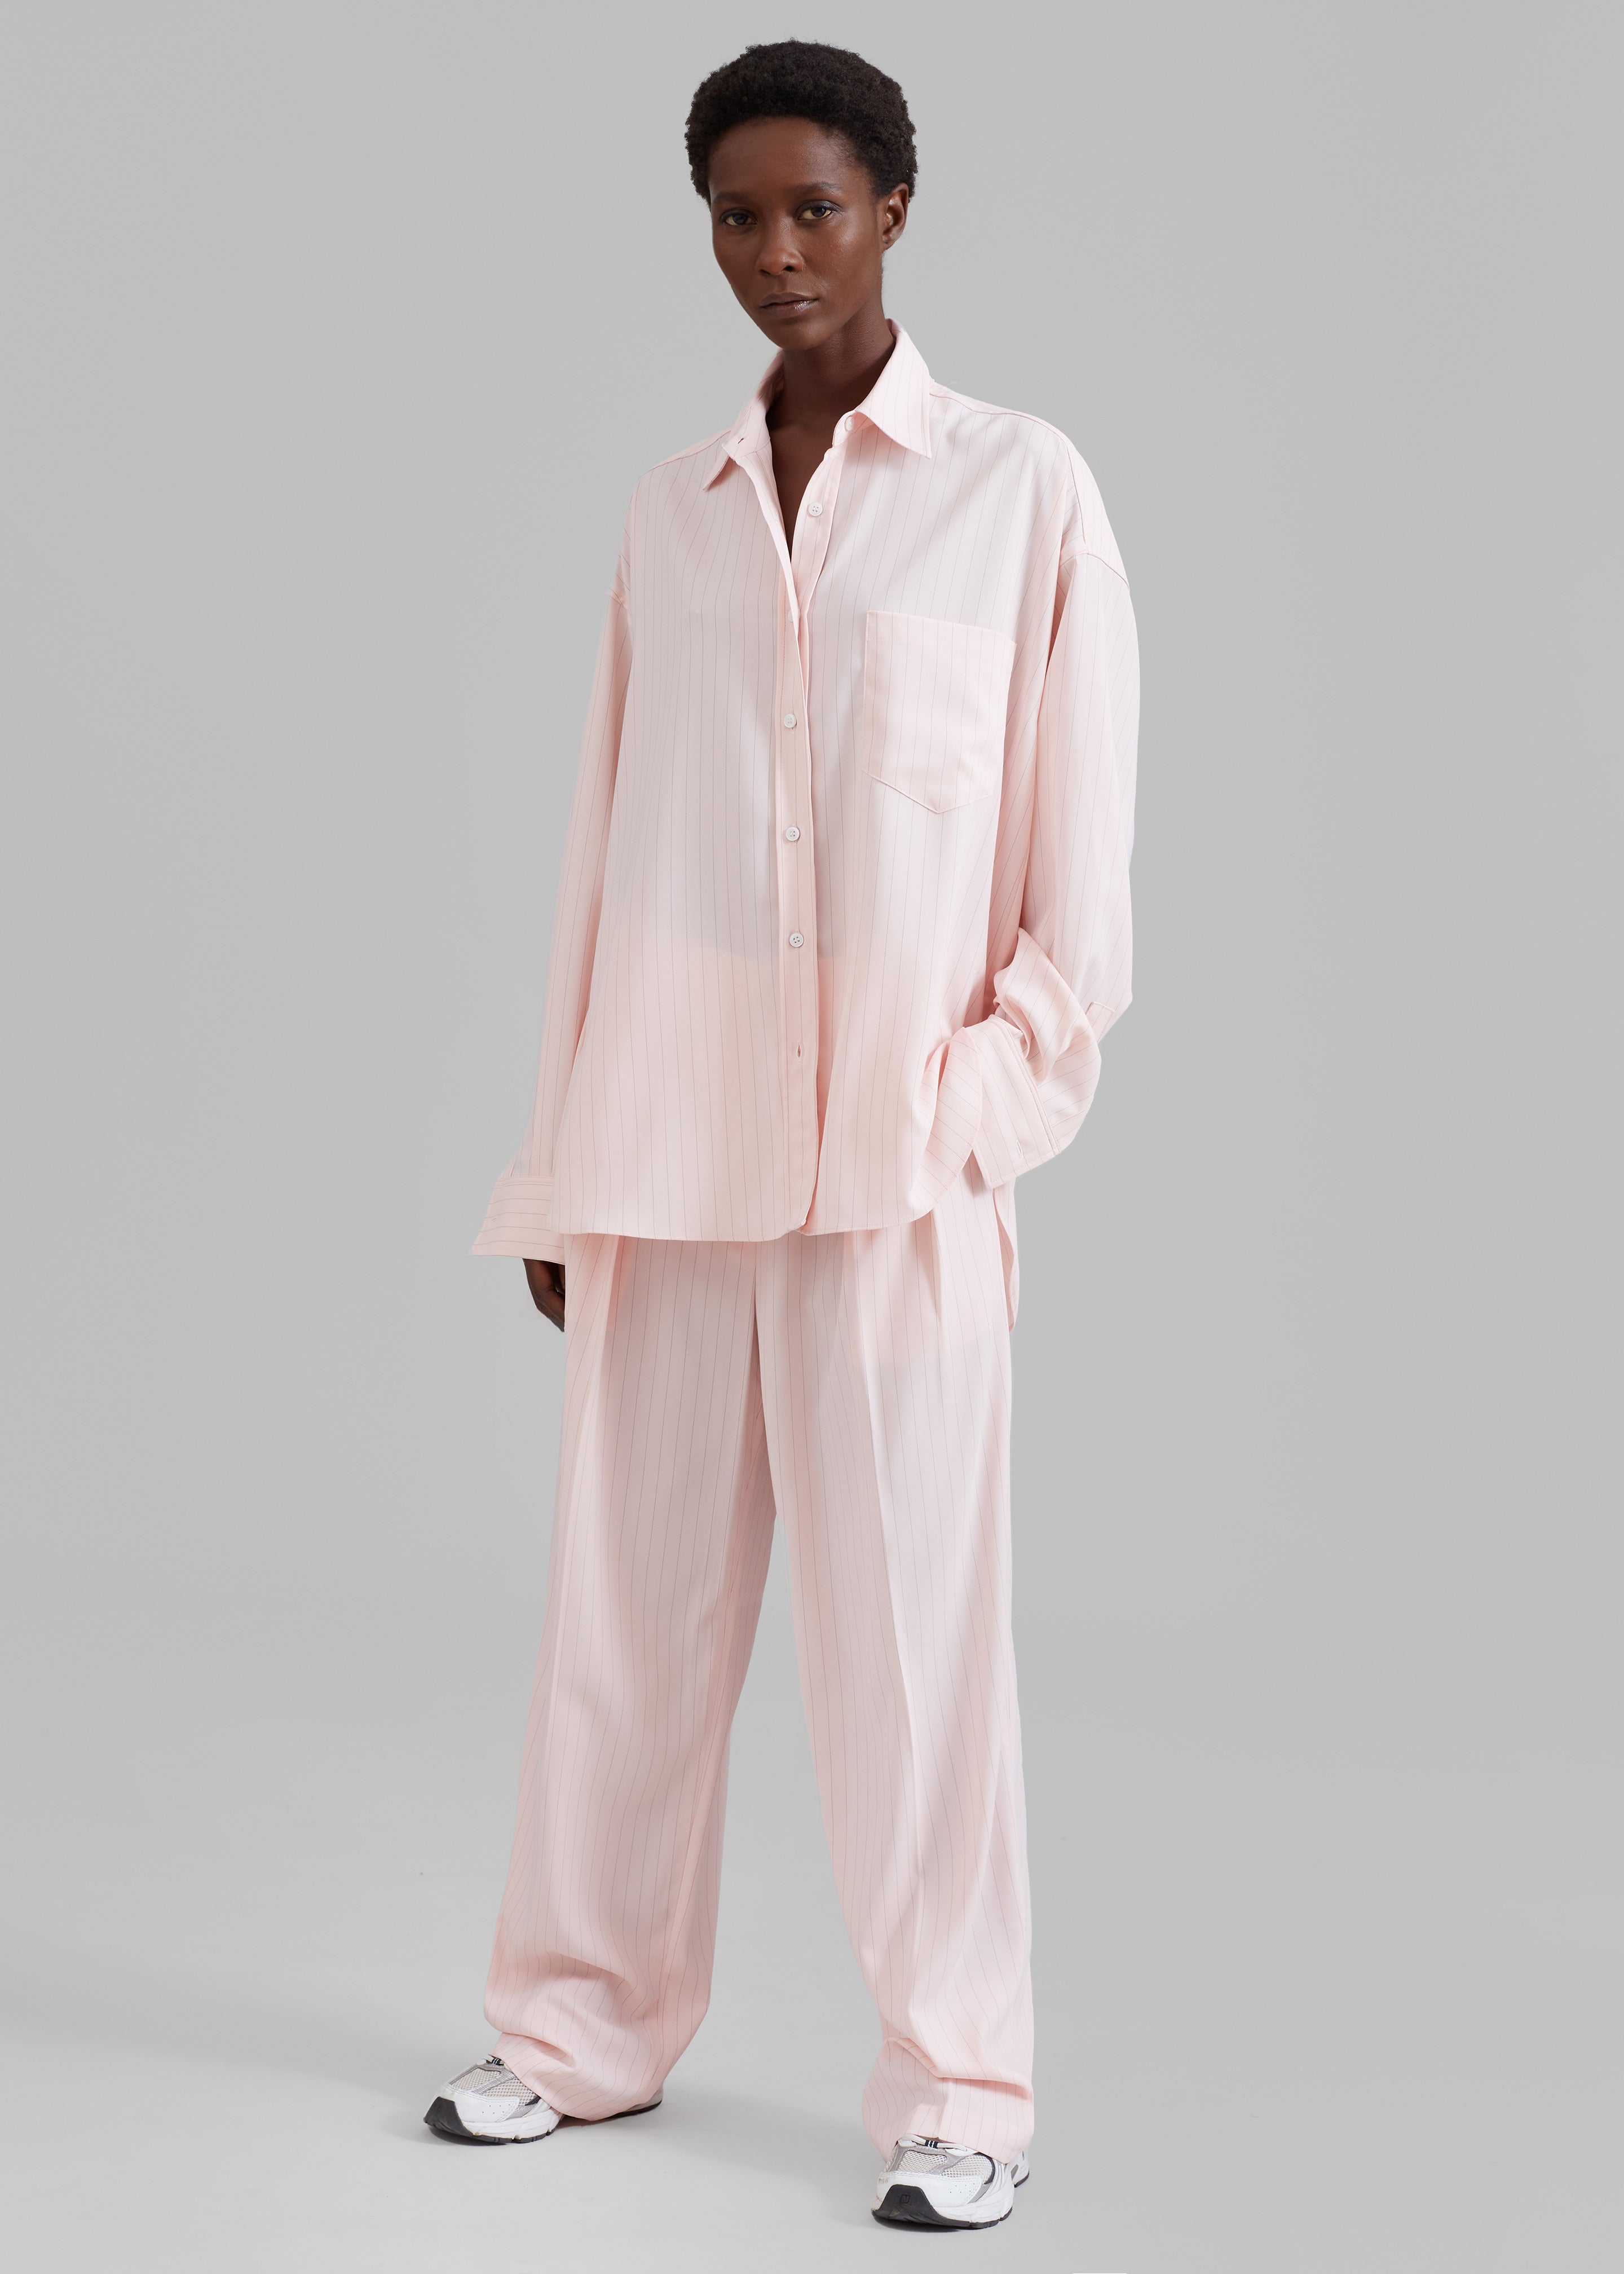 Tansy Fluid Pleated Trousers - Pink Pinstripe - 4